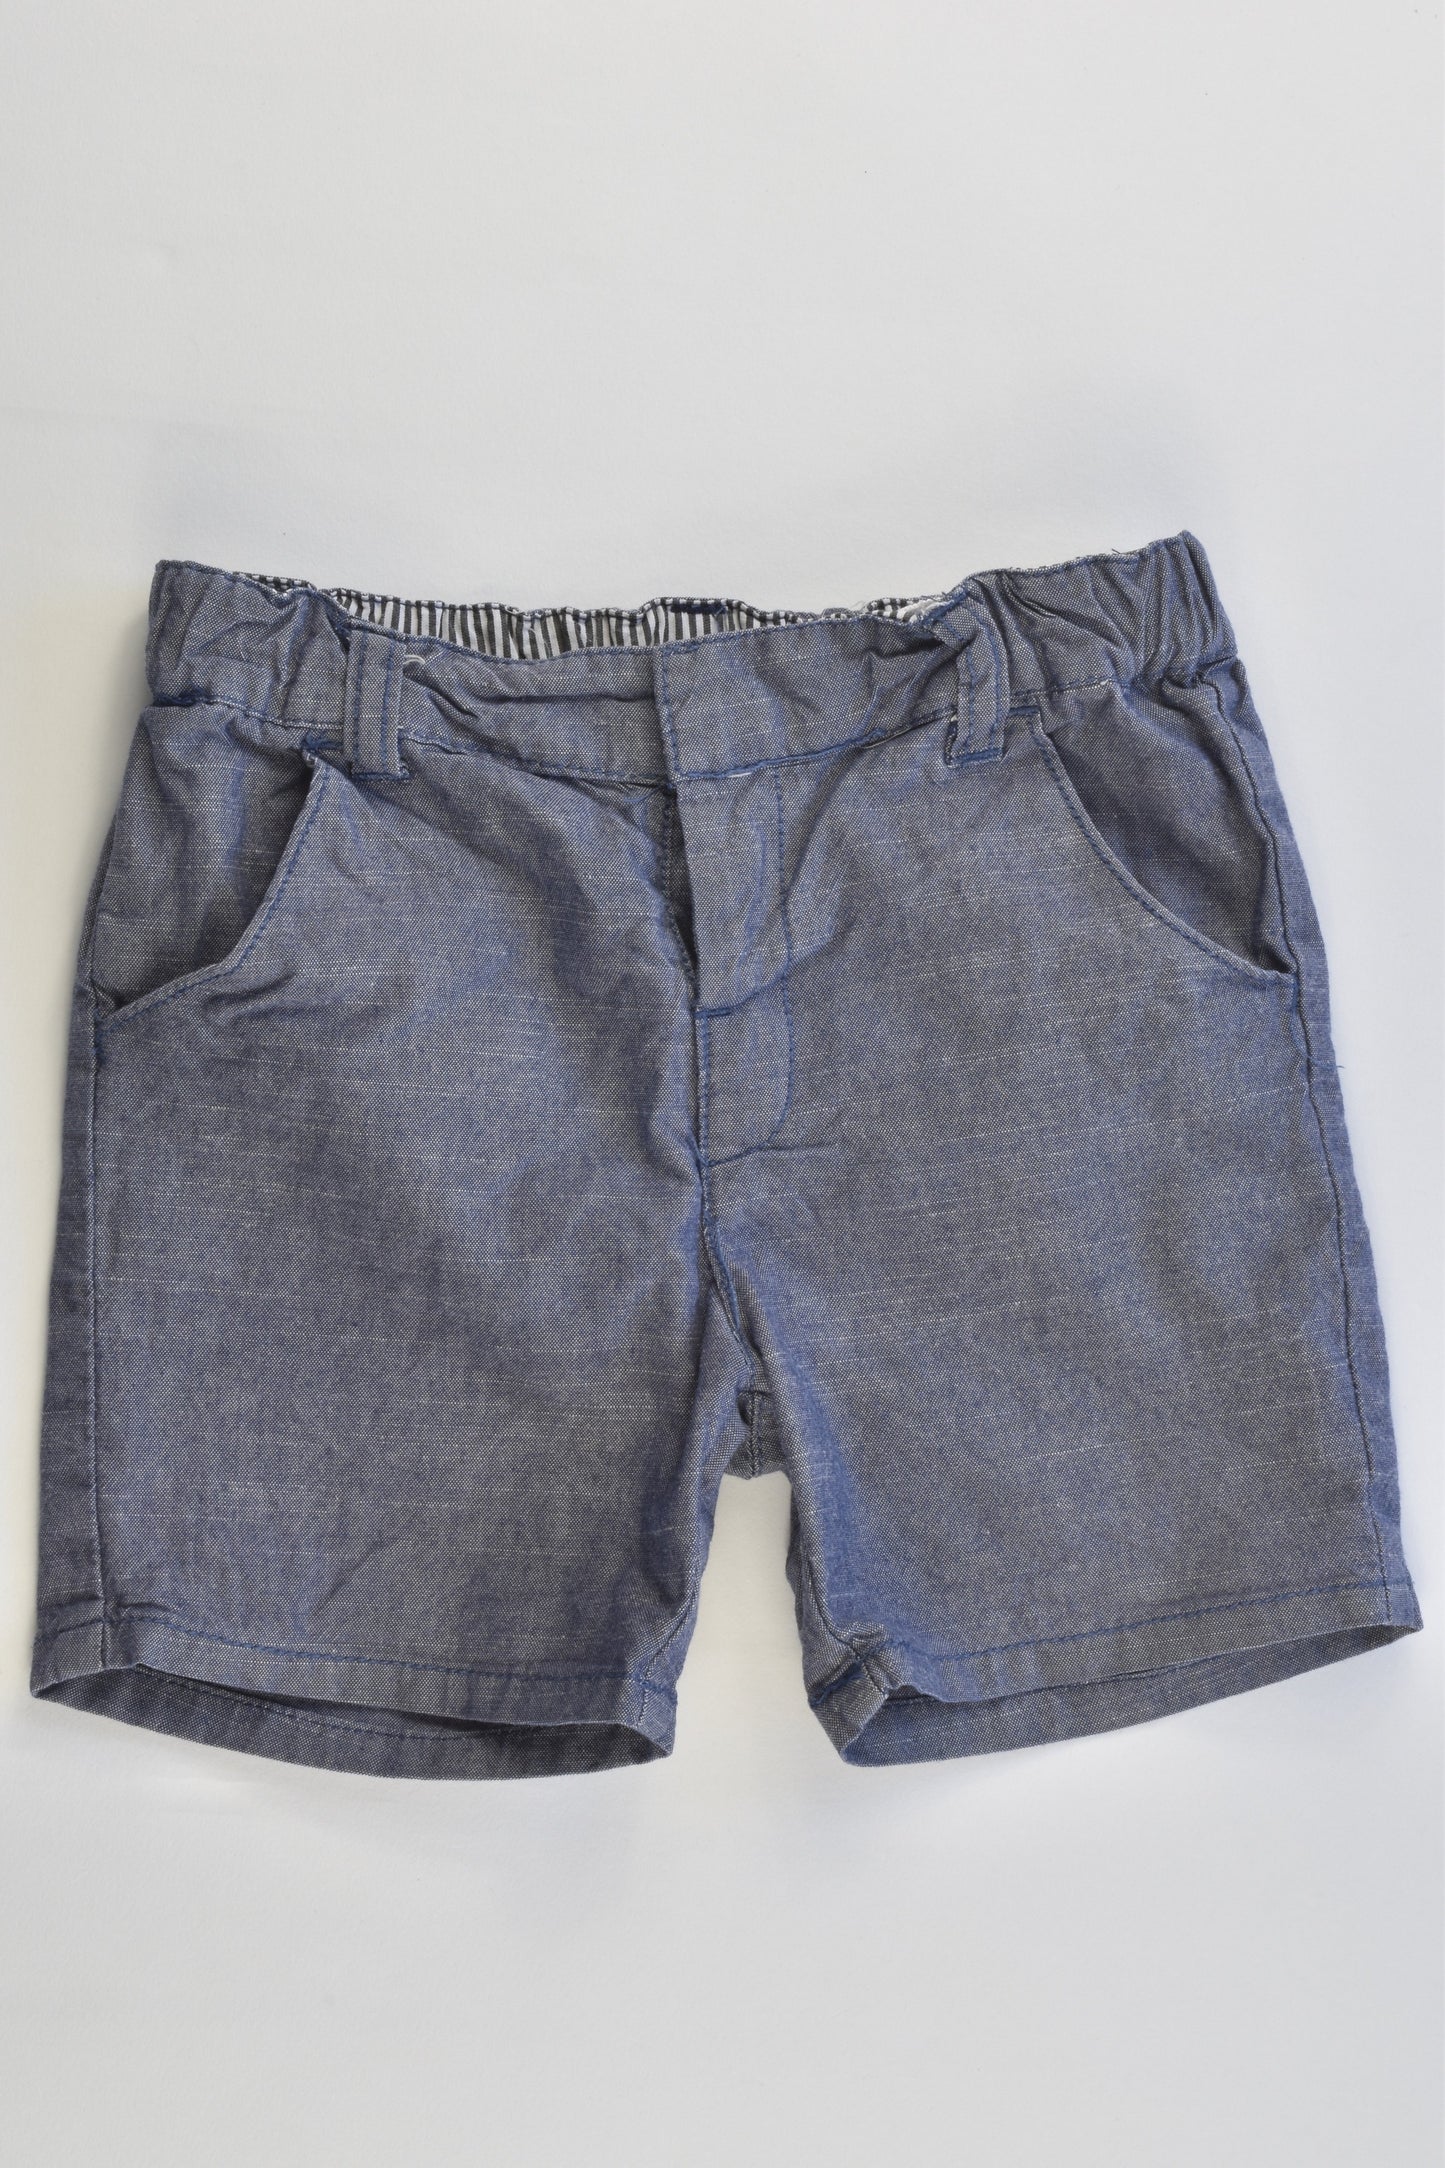 Target Size 1 (12-18 months) Shorts